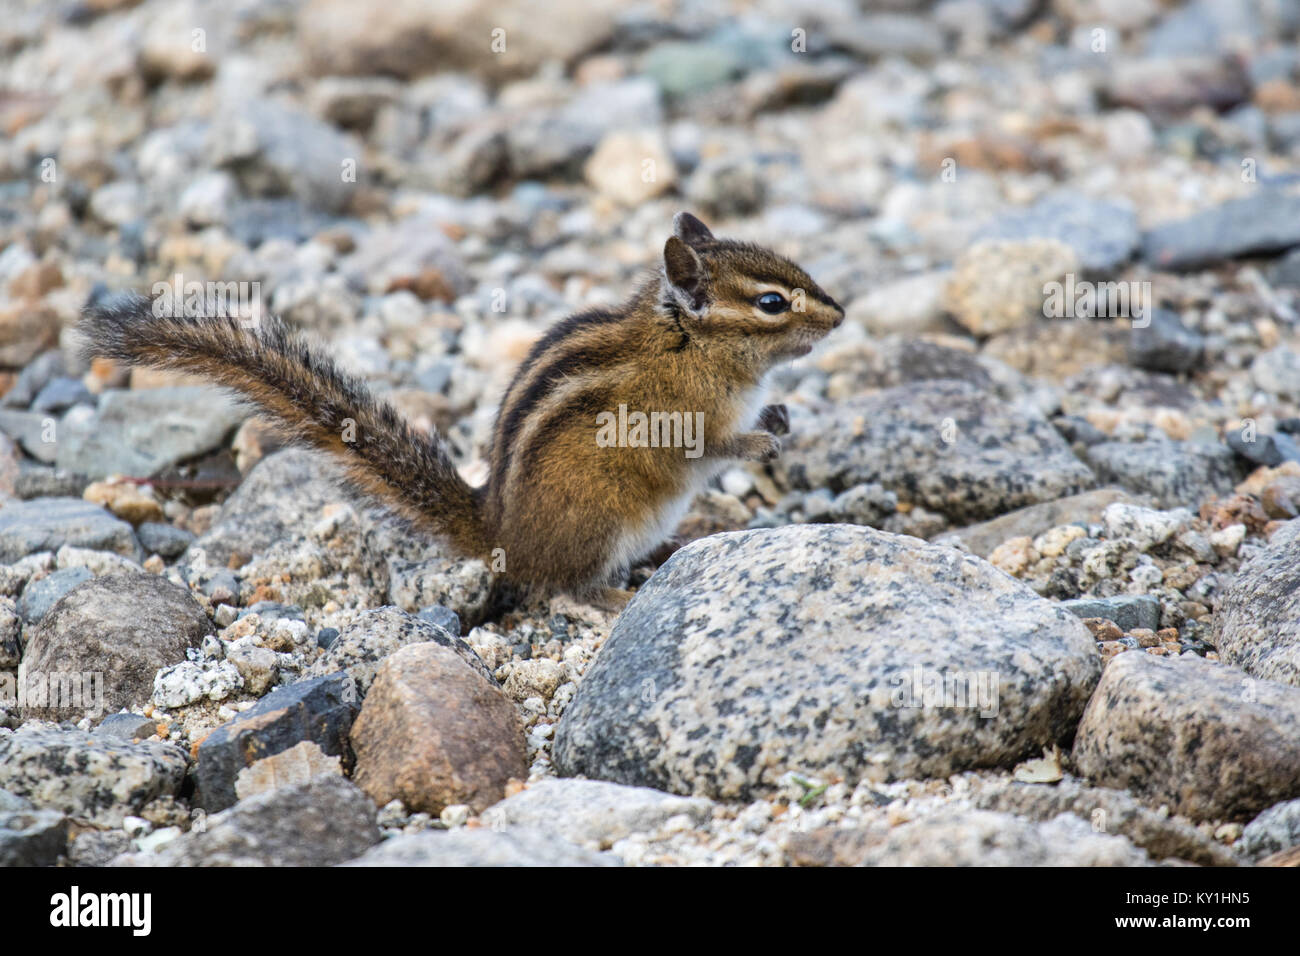 A cute chipmunk on the rocks in the Rocky Mountains Stock Photo